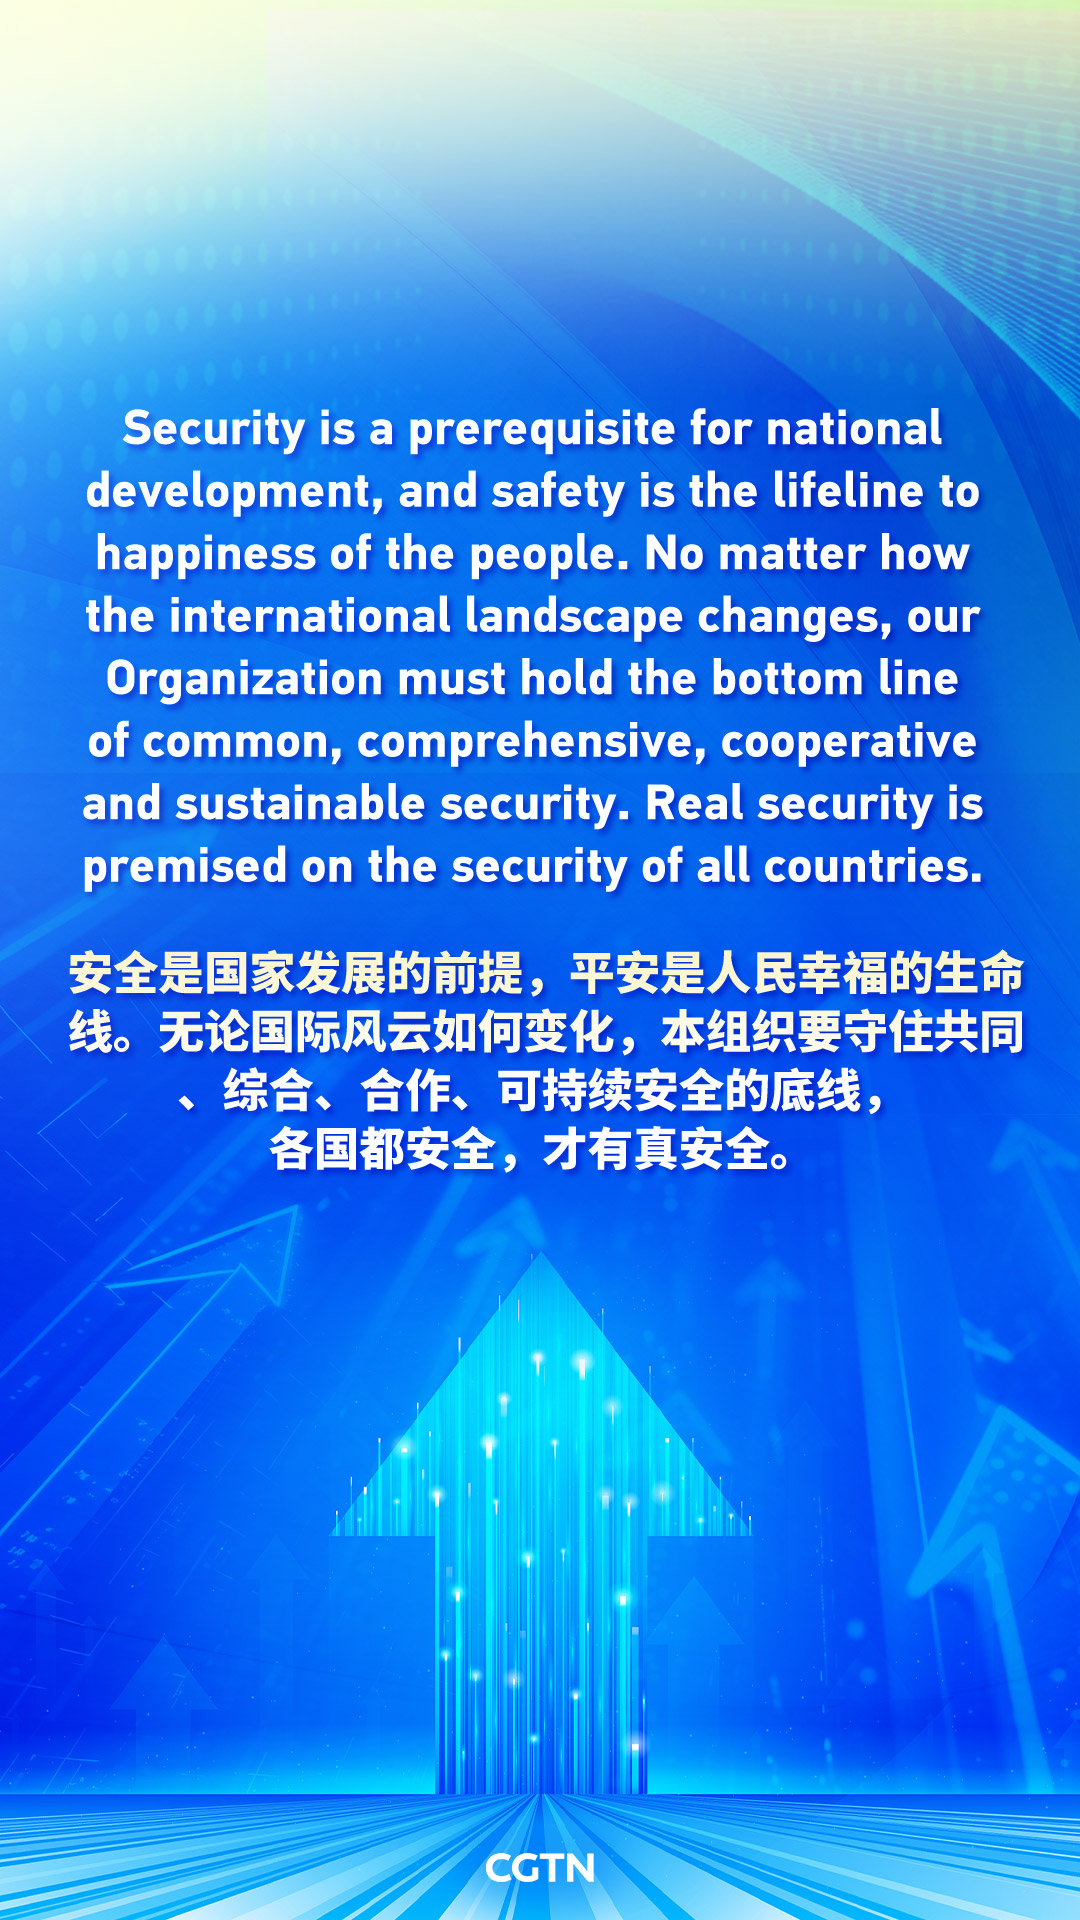 Key quotes from Xi Jinping's speech at SCO+ meeting